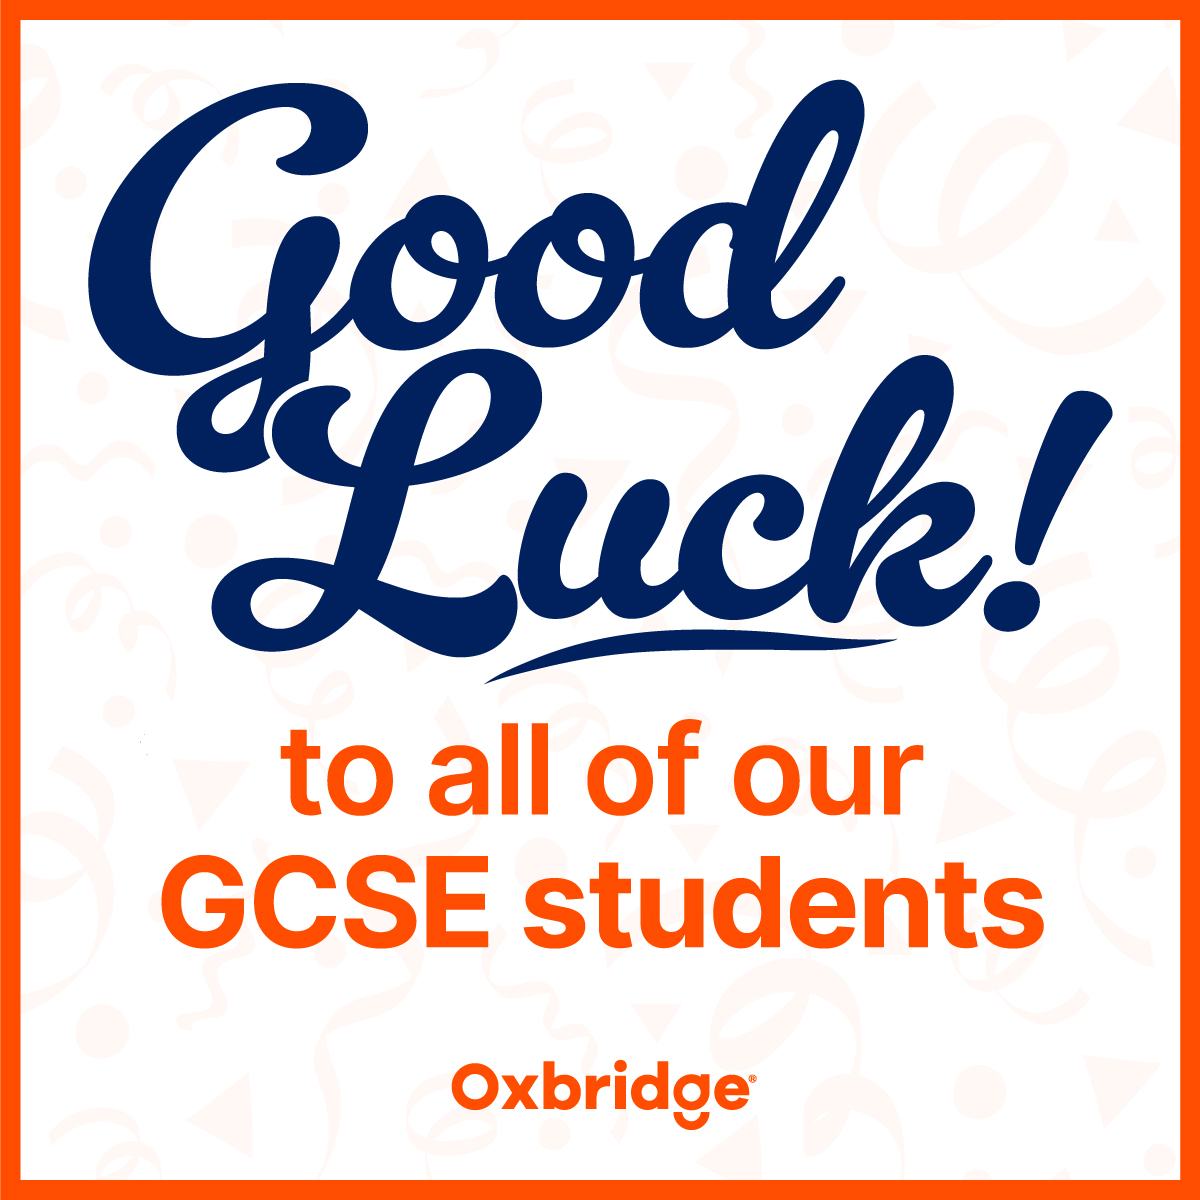 It's the big day - shoutout to all the #GCSE students getting their results this morning! We hope you get the results you want 🤞 #ResultsDay #GCSEstudents